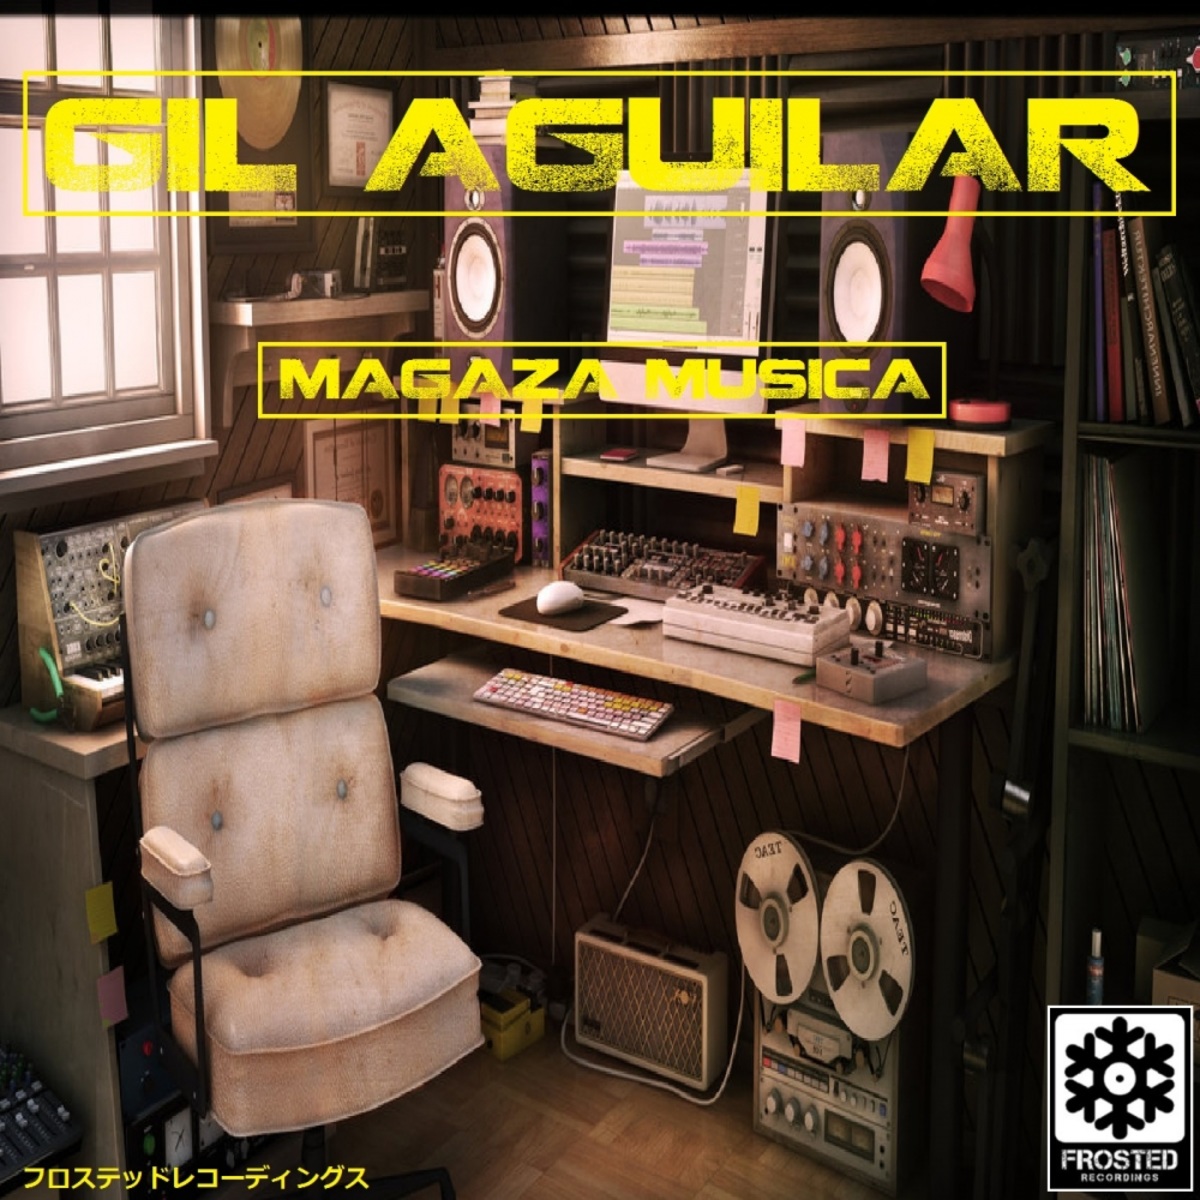 Gil Aguilar - Magaza Musica / Frosted Recordings